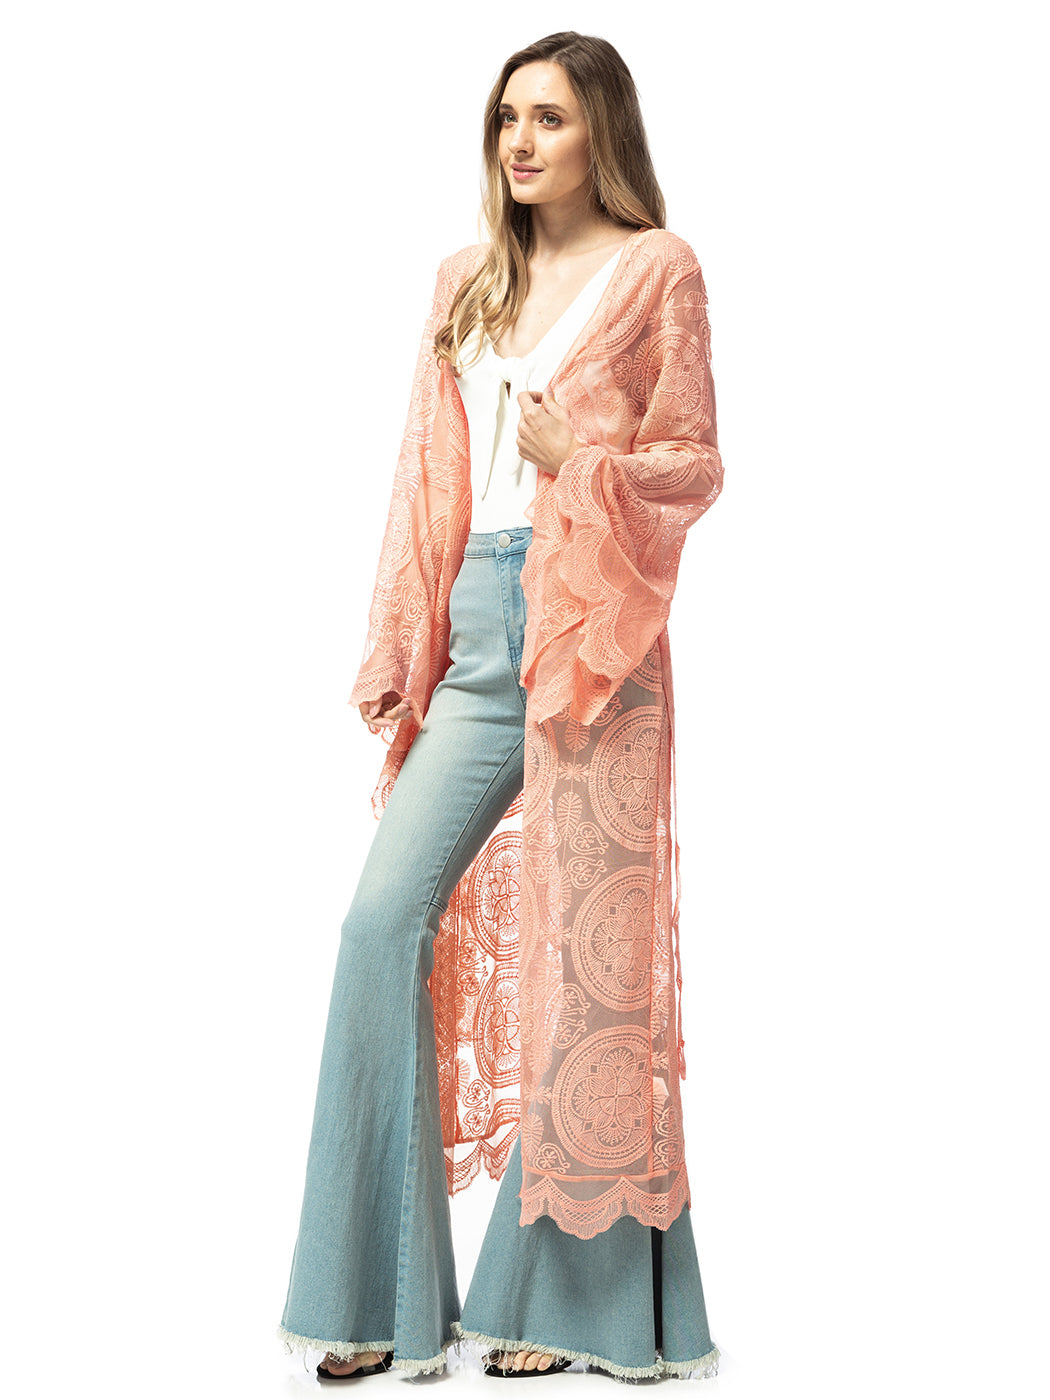 Lace Embroidered Kimono Swimsuit Cover-Up